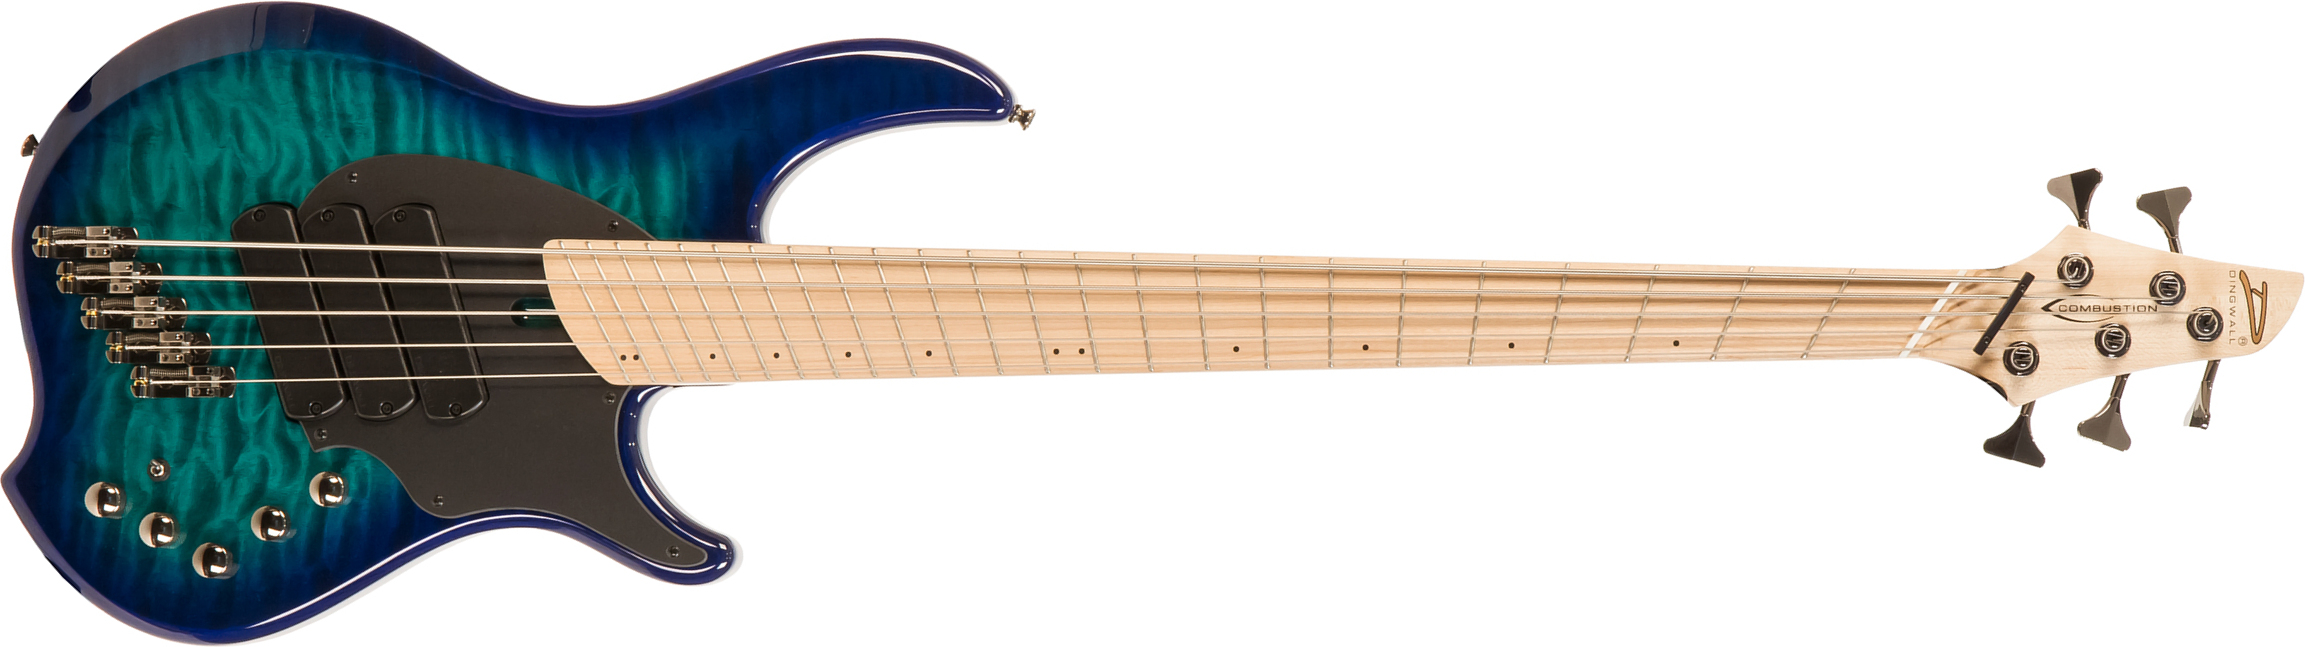 Dingwall Combustion Cb3 5c 3pu Active Mn - Whalepool Burst - Solidbody E-bass - Main picture